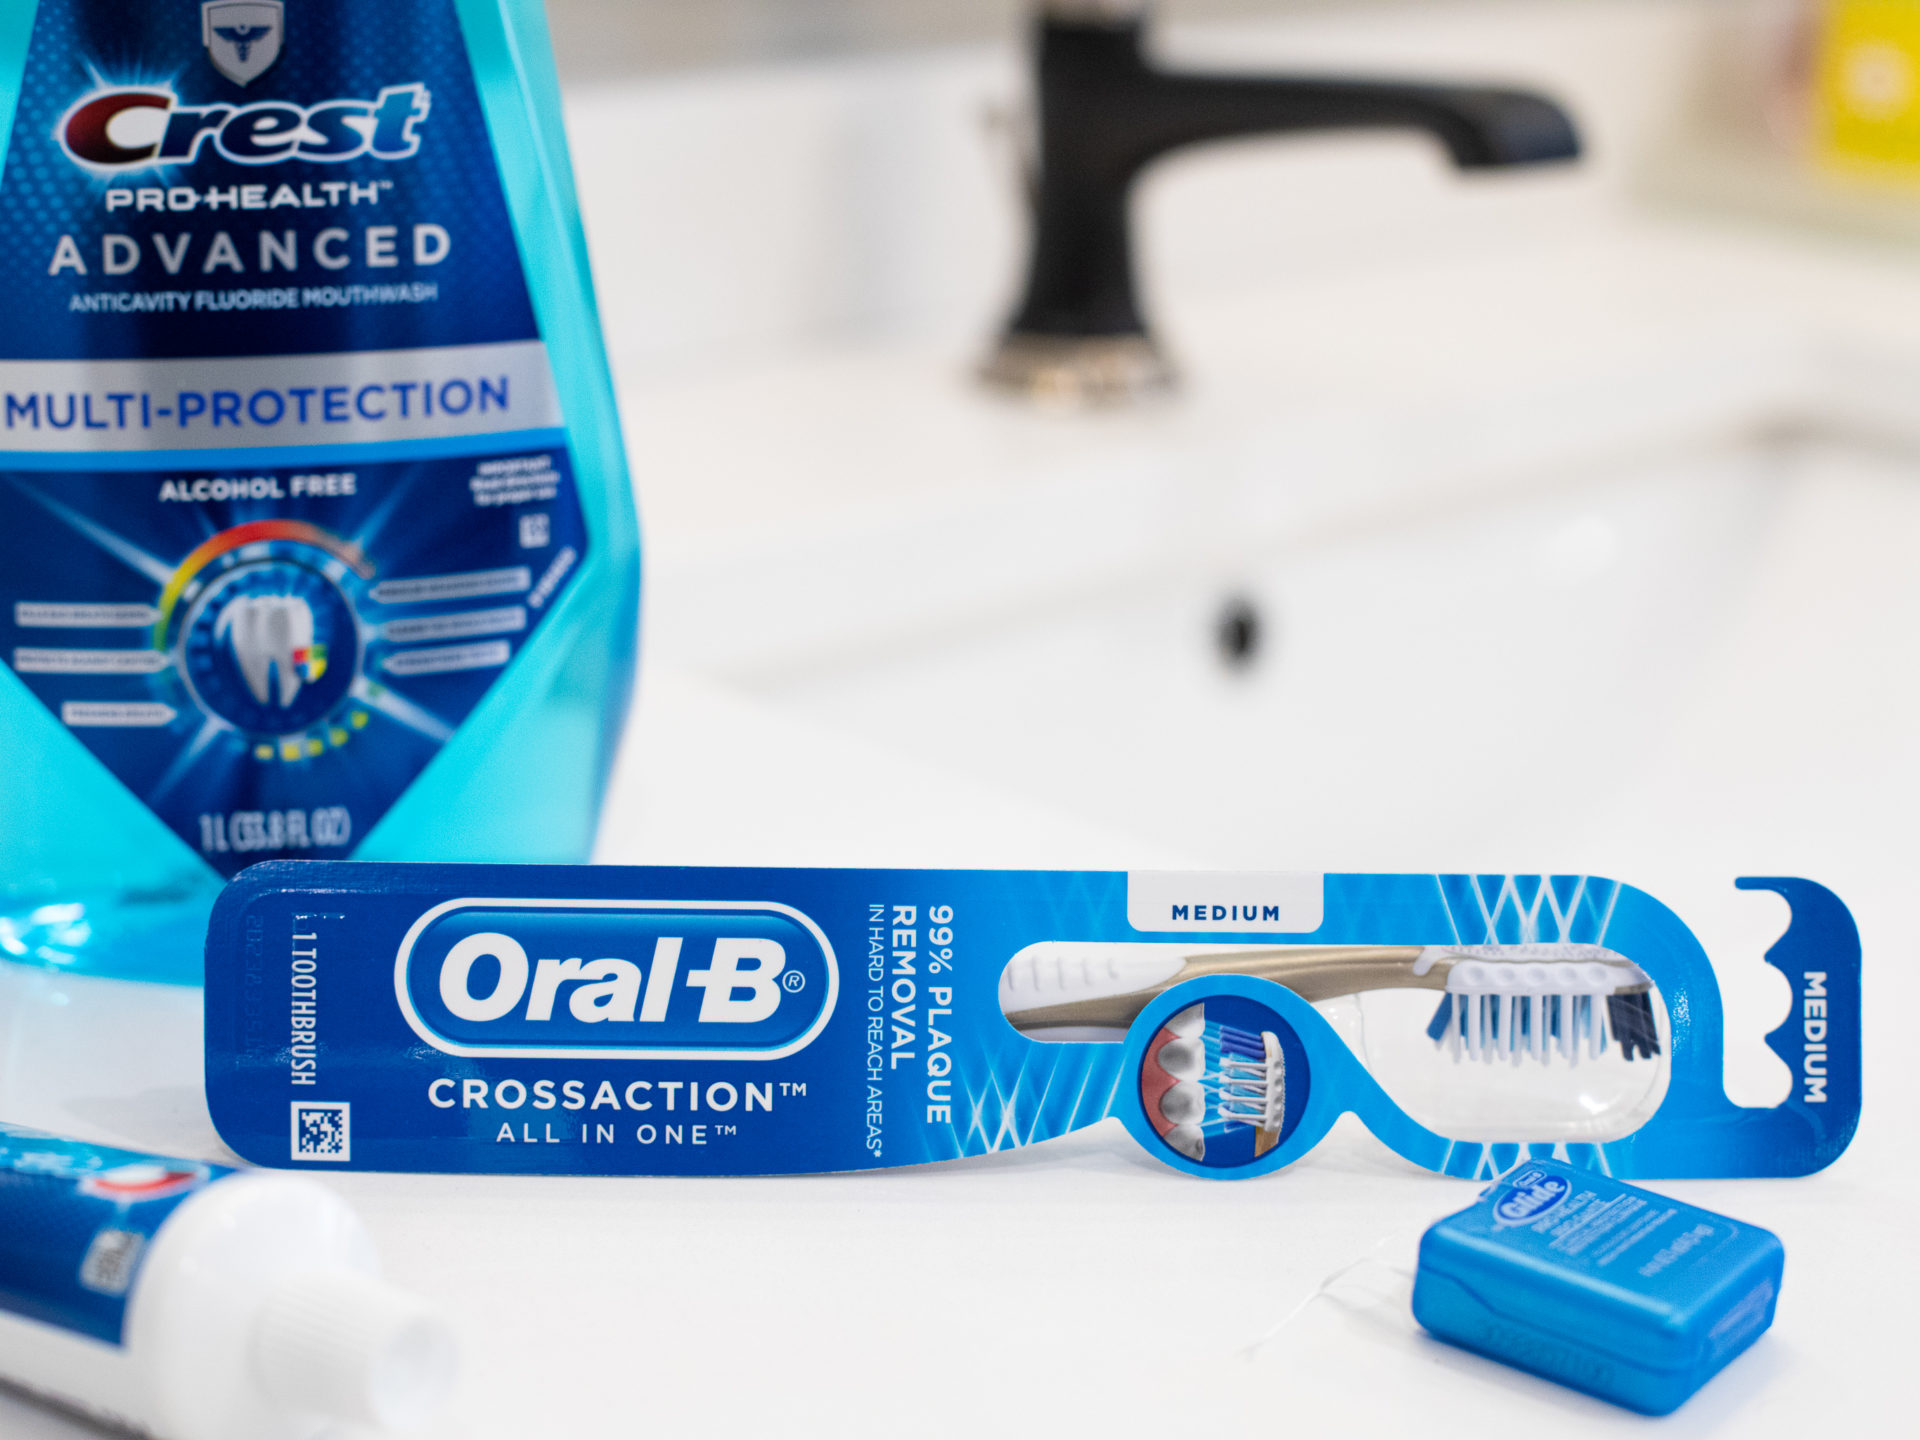 Oral-B Vivid Manual Toothbrush As Low As FREE At Kroger (Plus Other Cheap Toothbrushes)